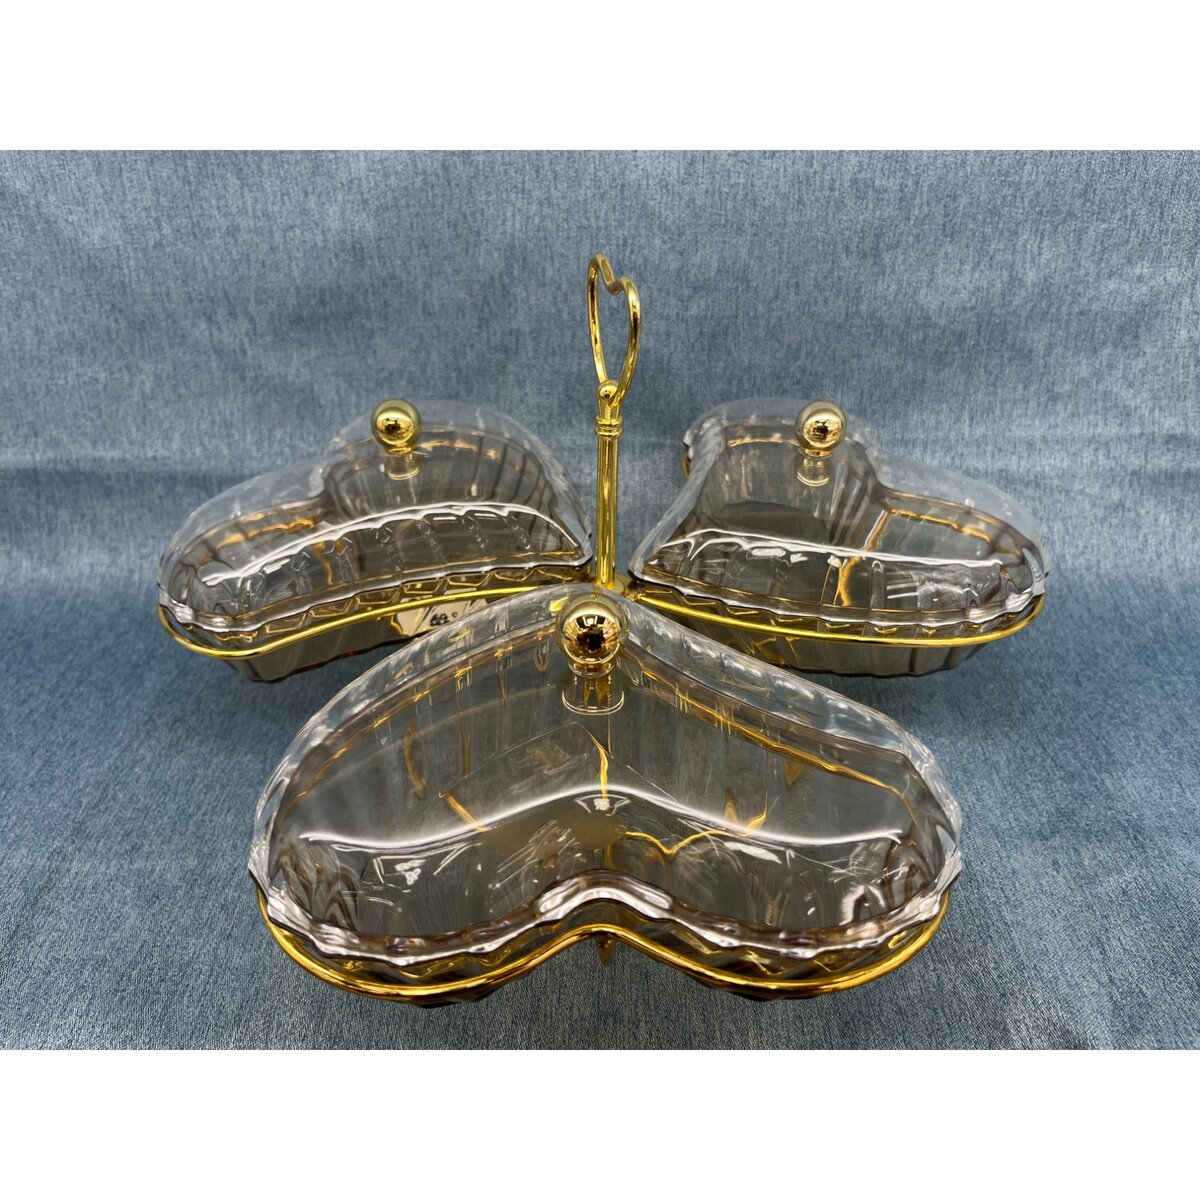 Home Heart-Shaped Decorative Bowl Candy Tray, MKT23/24